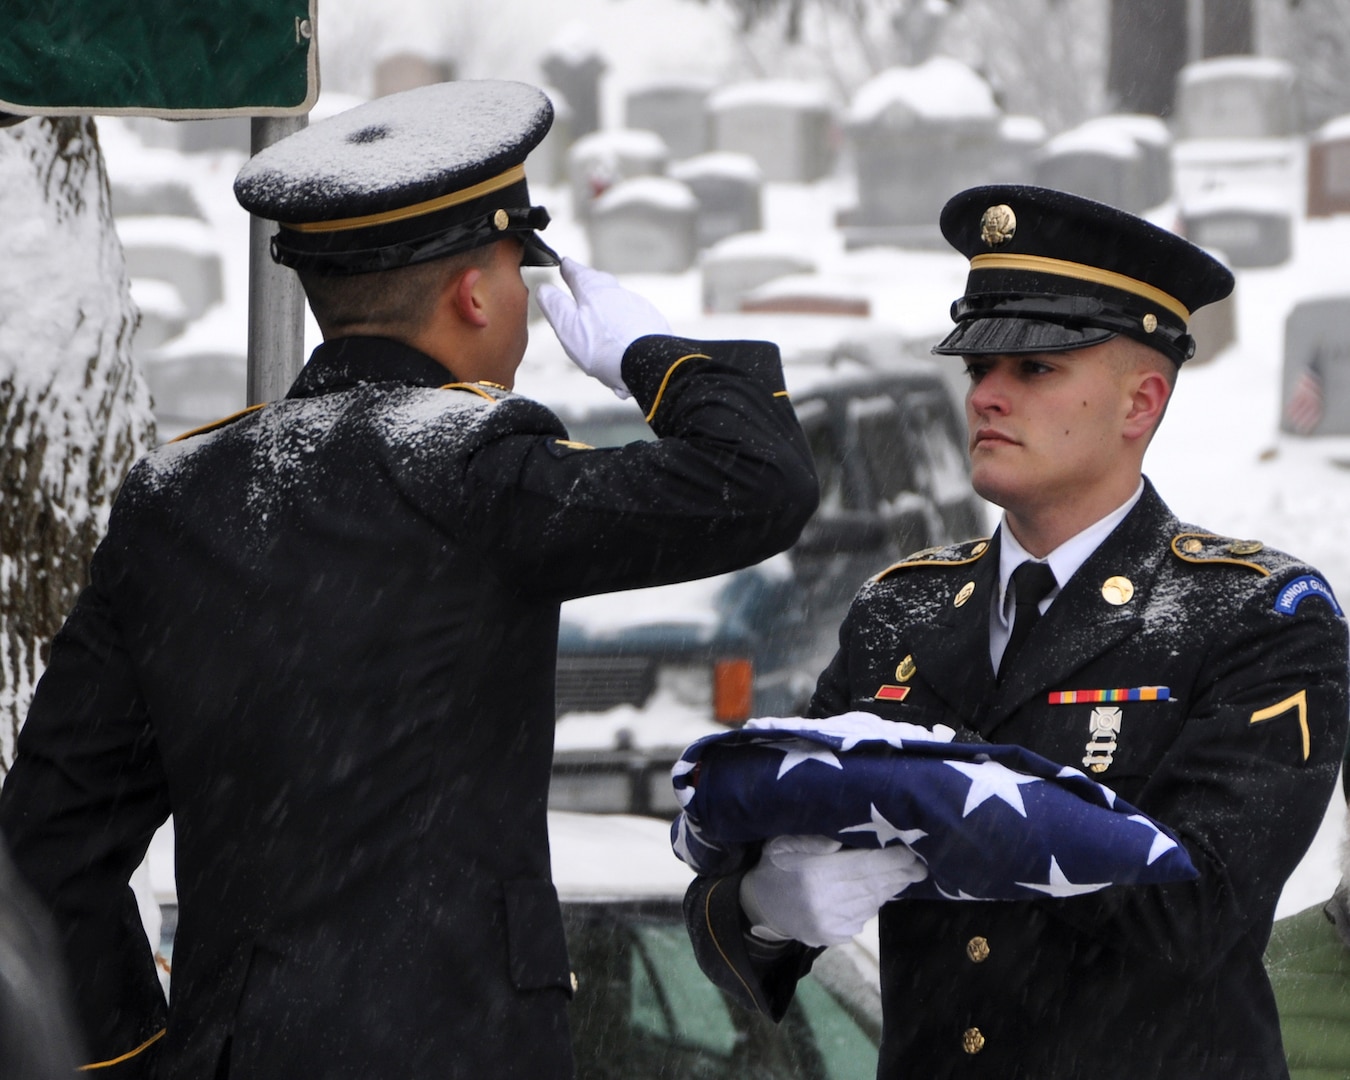 New York Army National Guard Spc. Christopher Roderiguez salutes the flag held by Pvt. Shelbi Vanderbogart as they complete folding the flag to be presented to the family of Army veteran Harold Smith during graveside services in Hudson, N.Y., Dec. 17, 2013. 